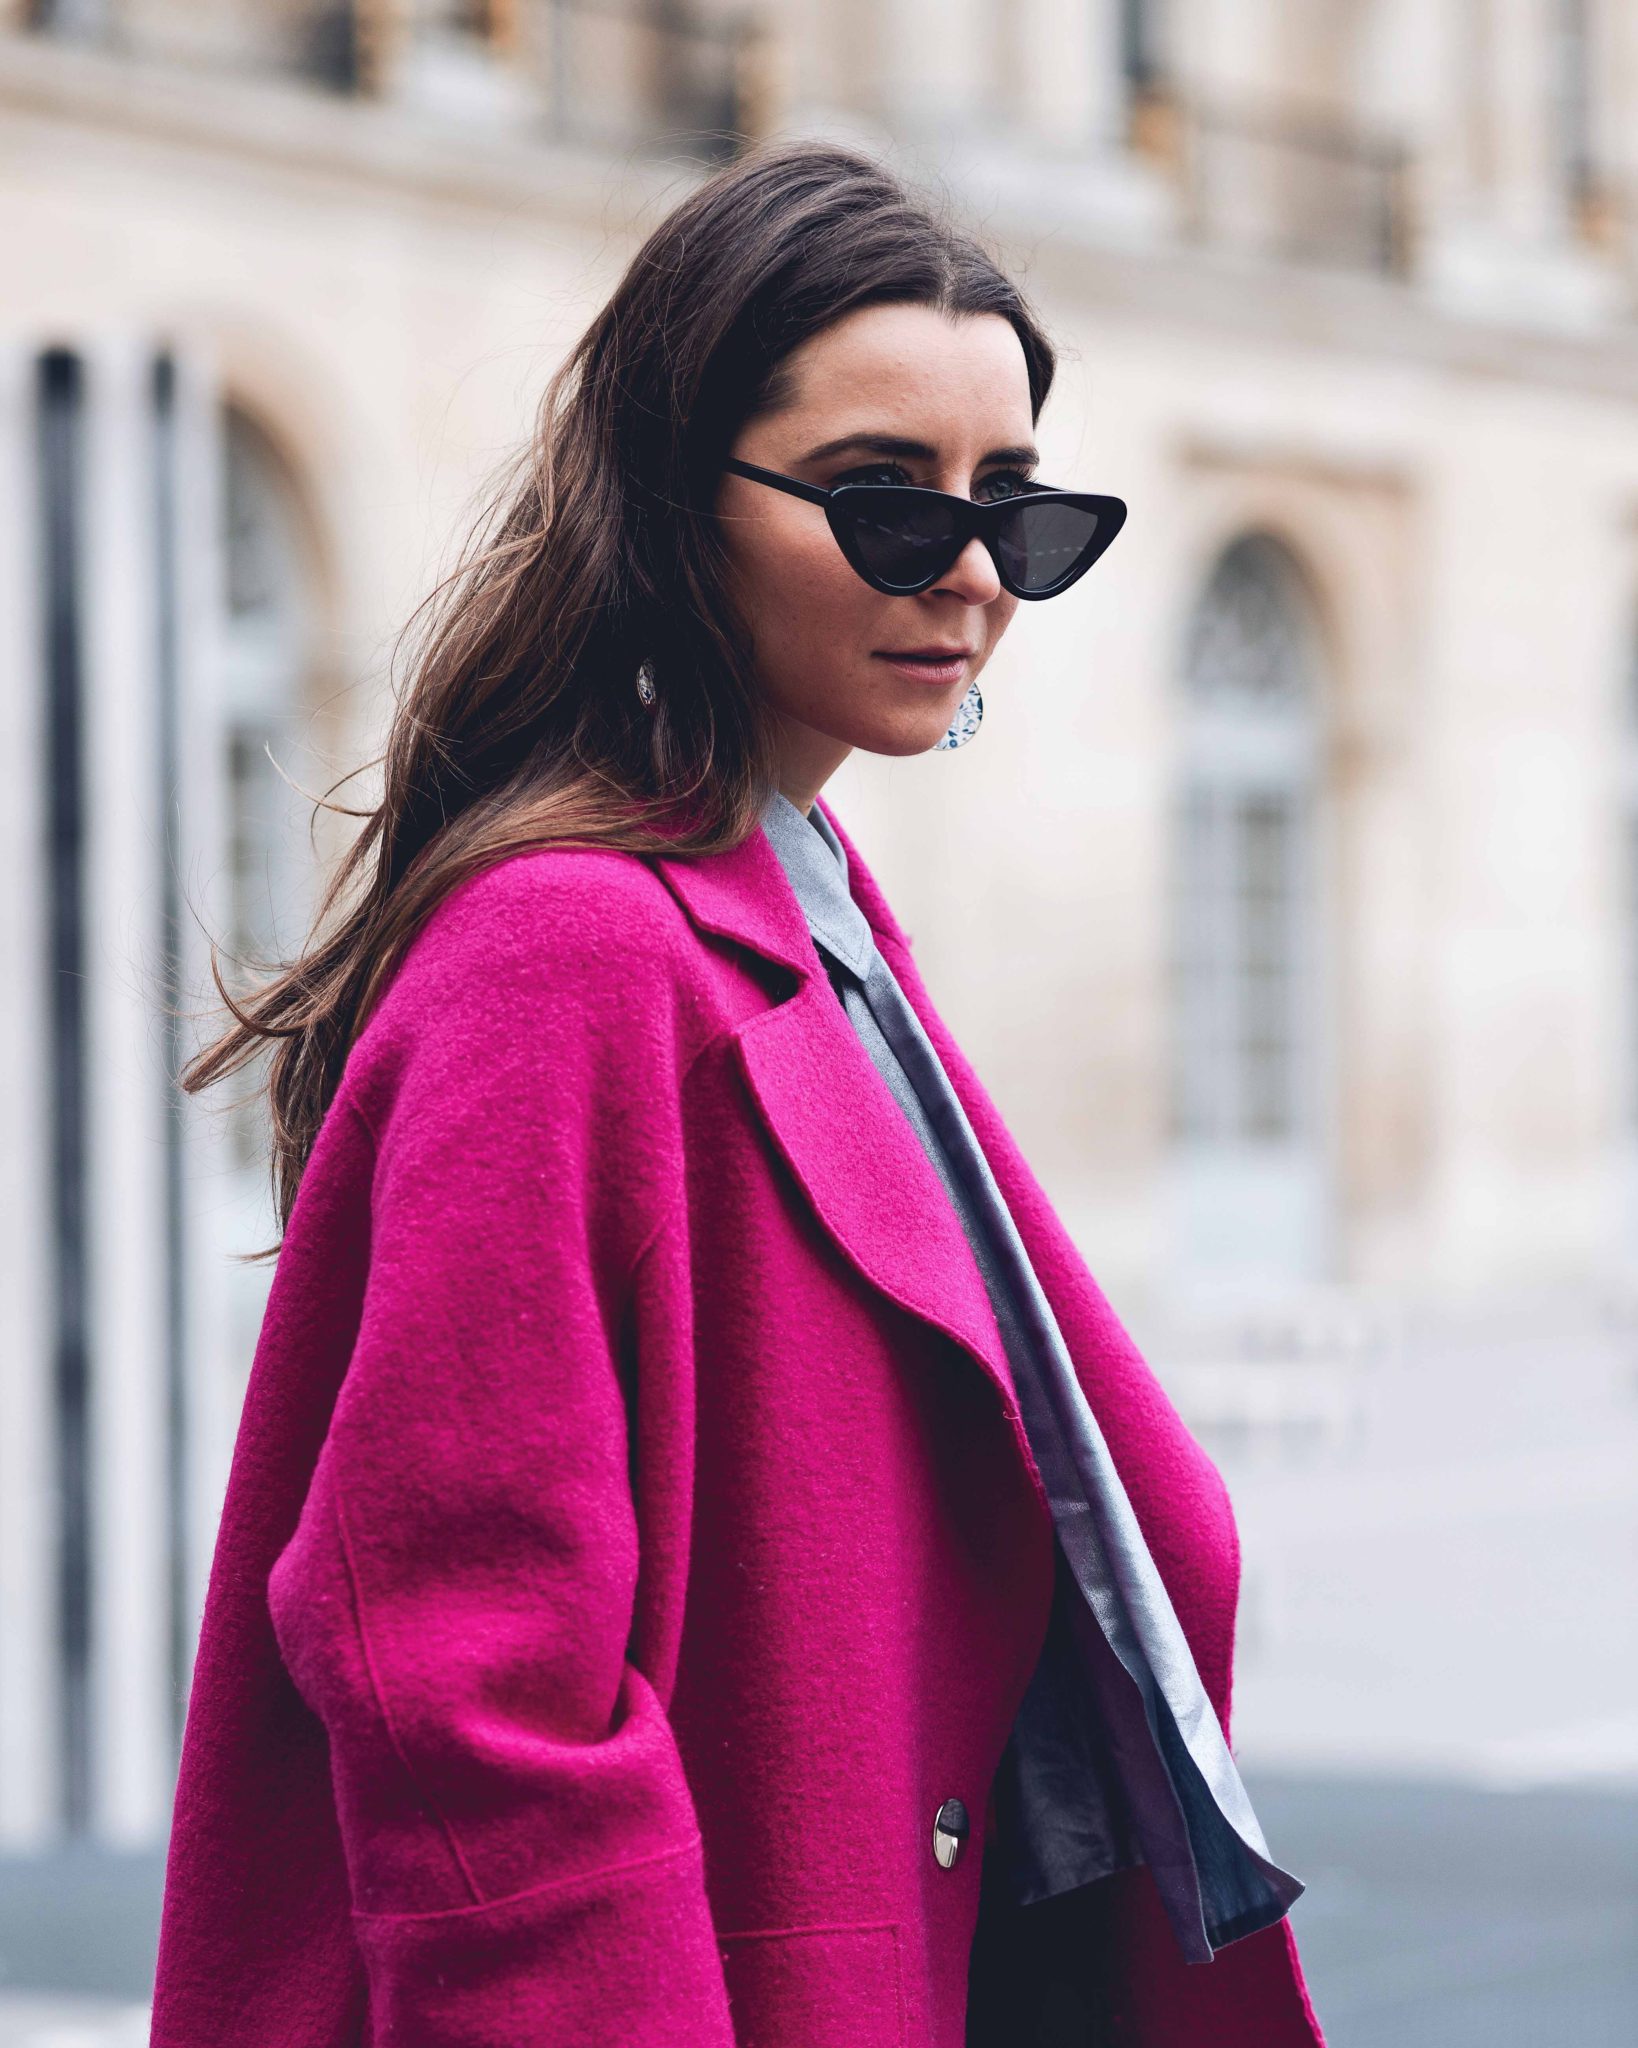 Best Street Style Paris Fashion Week Mars 2018 of Julia Comil / French Fashion Blogger in Los Angeles - Outfit for John Galliano Fall Winter 2018 2019 show - Pink Tara Jarmon Coat and Blouse - Strathberry Bag - The Kooples Denim - Palais Royal